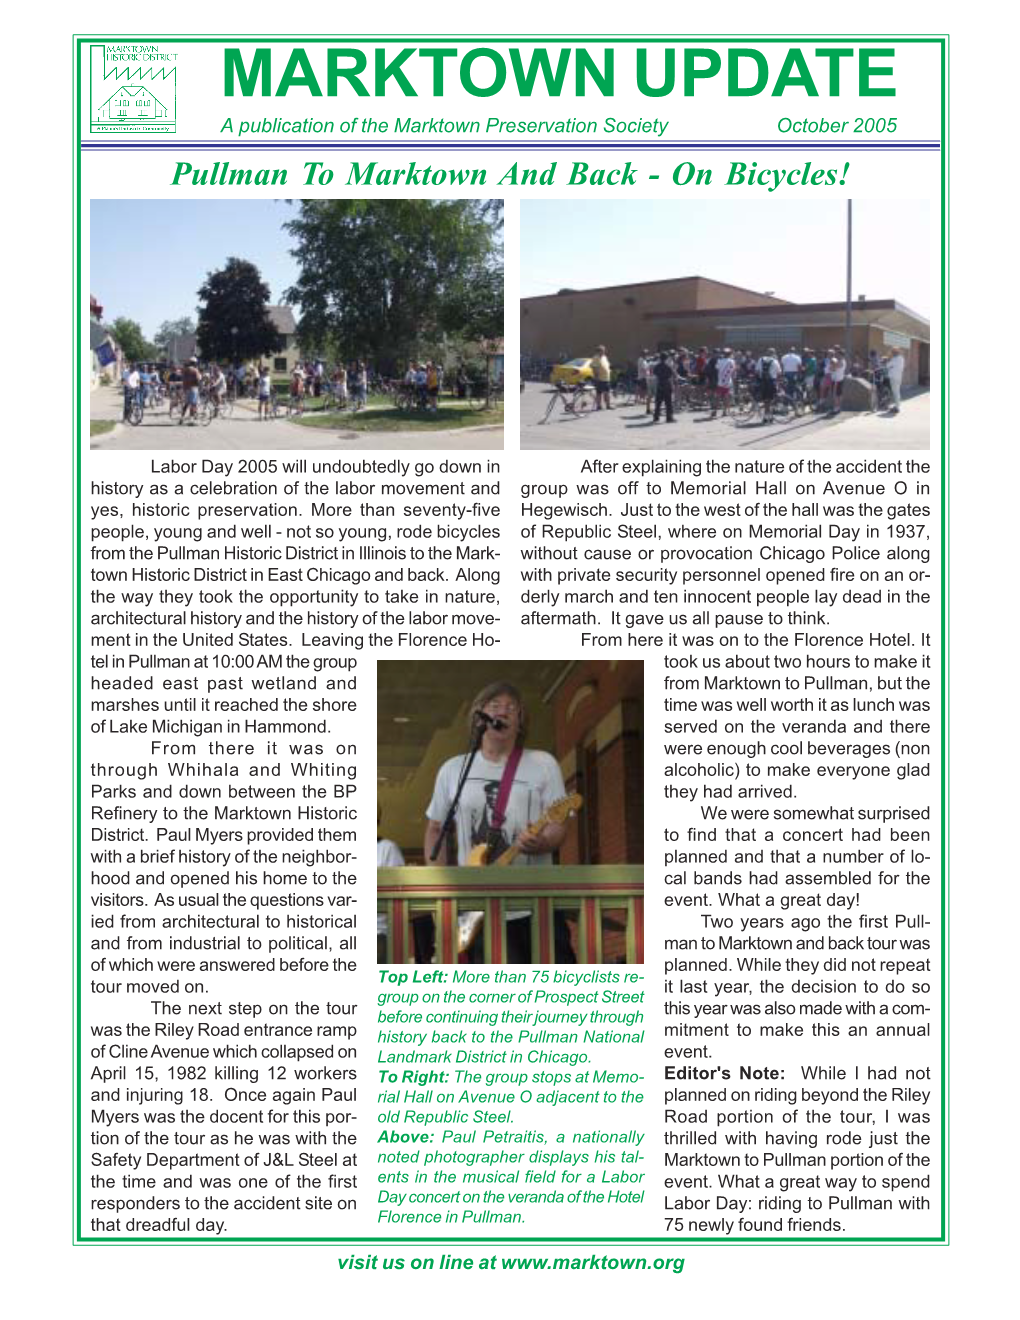 MARKTOWN UPDATE a Publication of the Marktown Preservation Society October 2005 Pullman to Marktown and Back - on Bicycles!